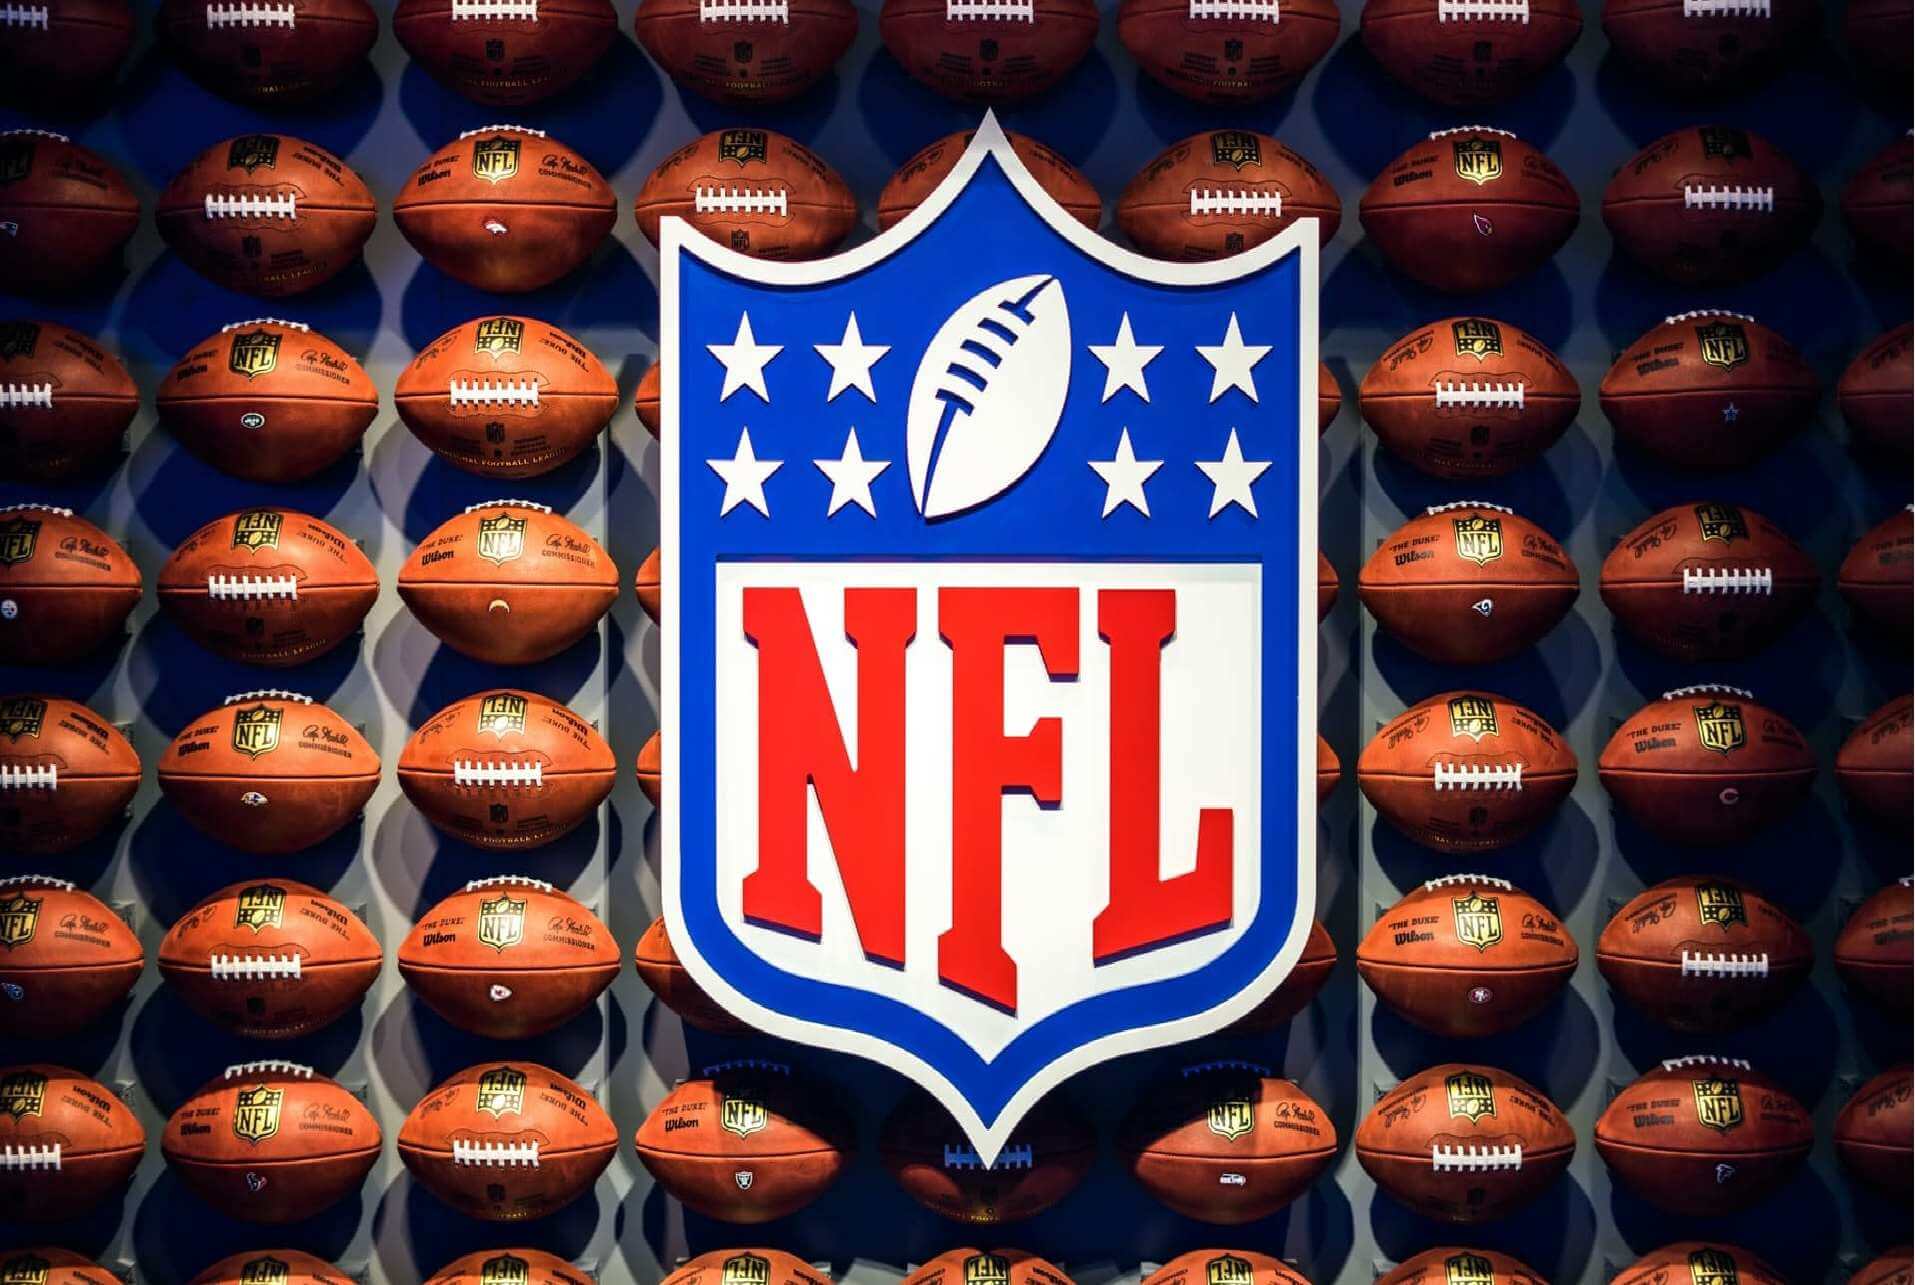 Activate NFL.com on Smart TVs, Streaming Channels and Devices